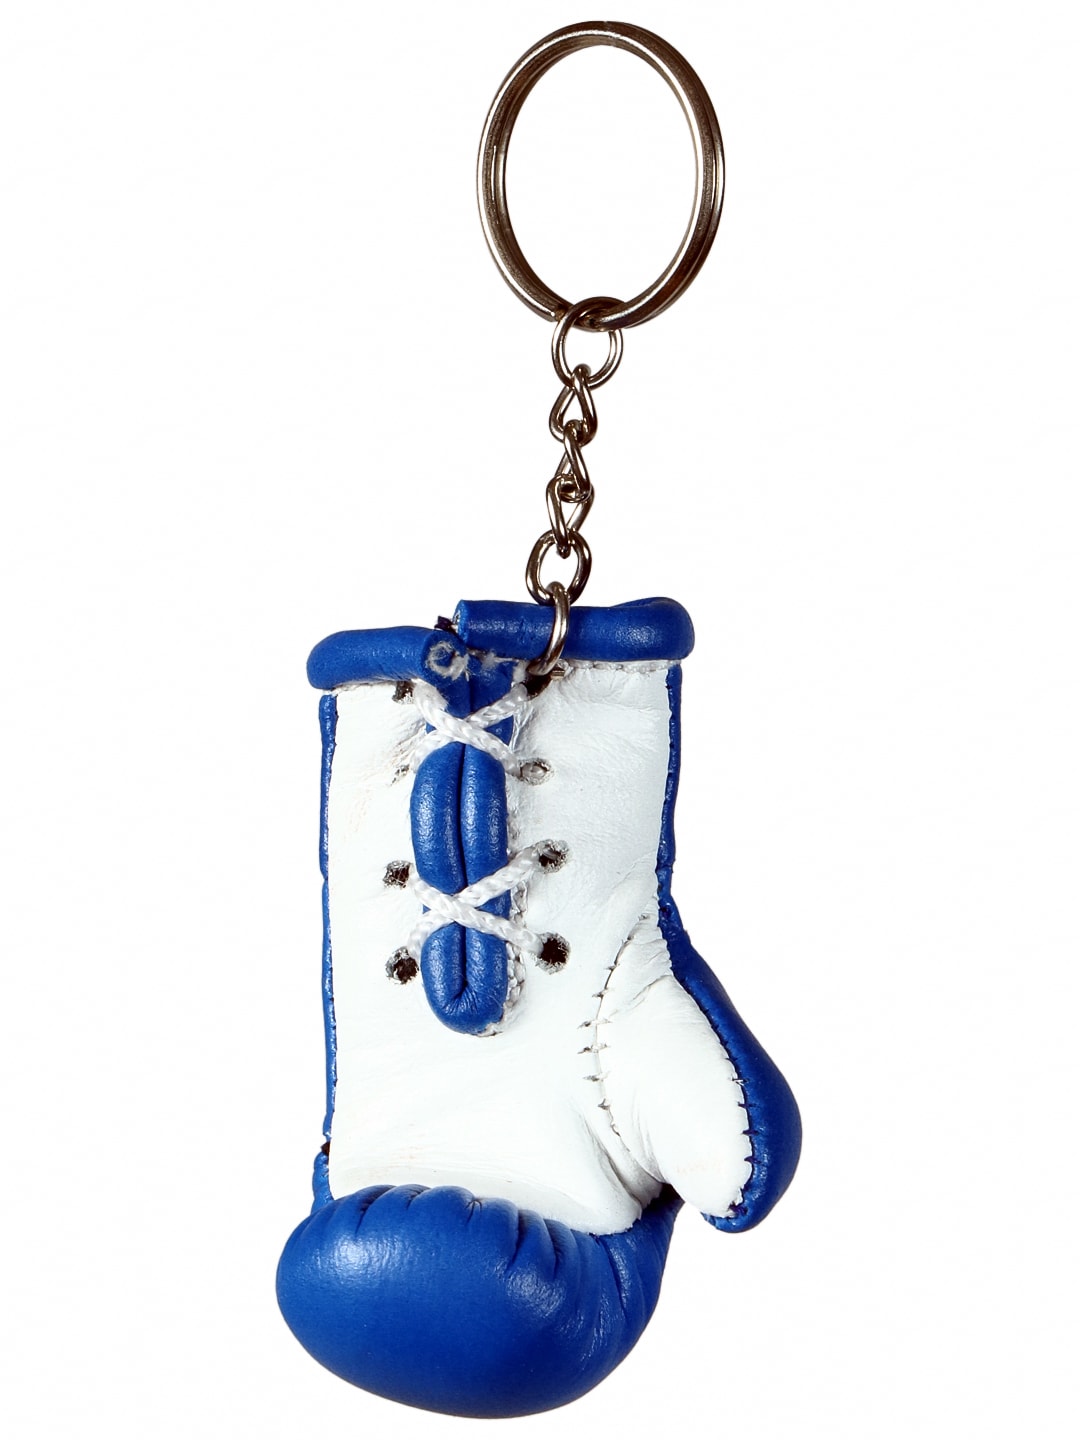 Invincible Glove Key Ring